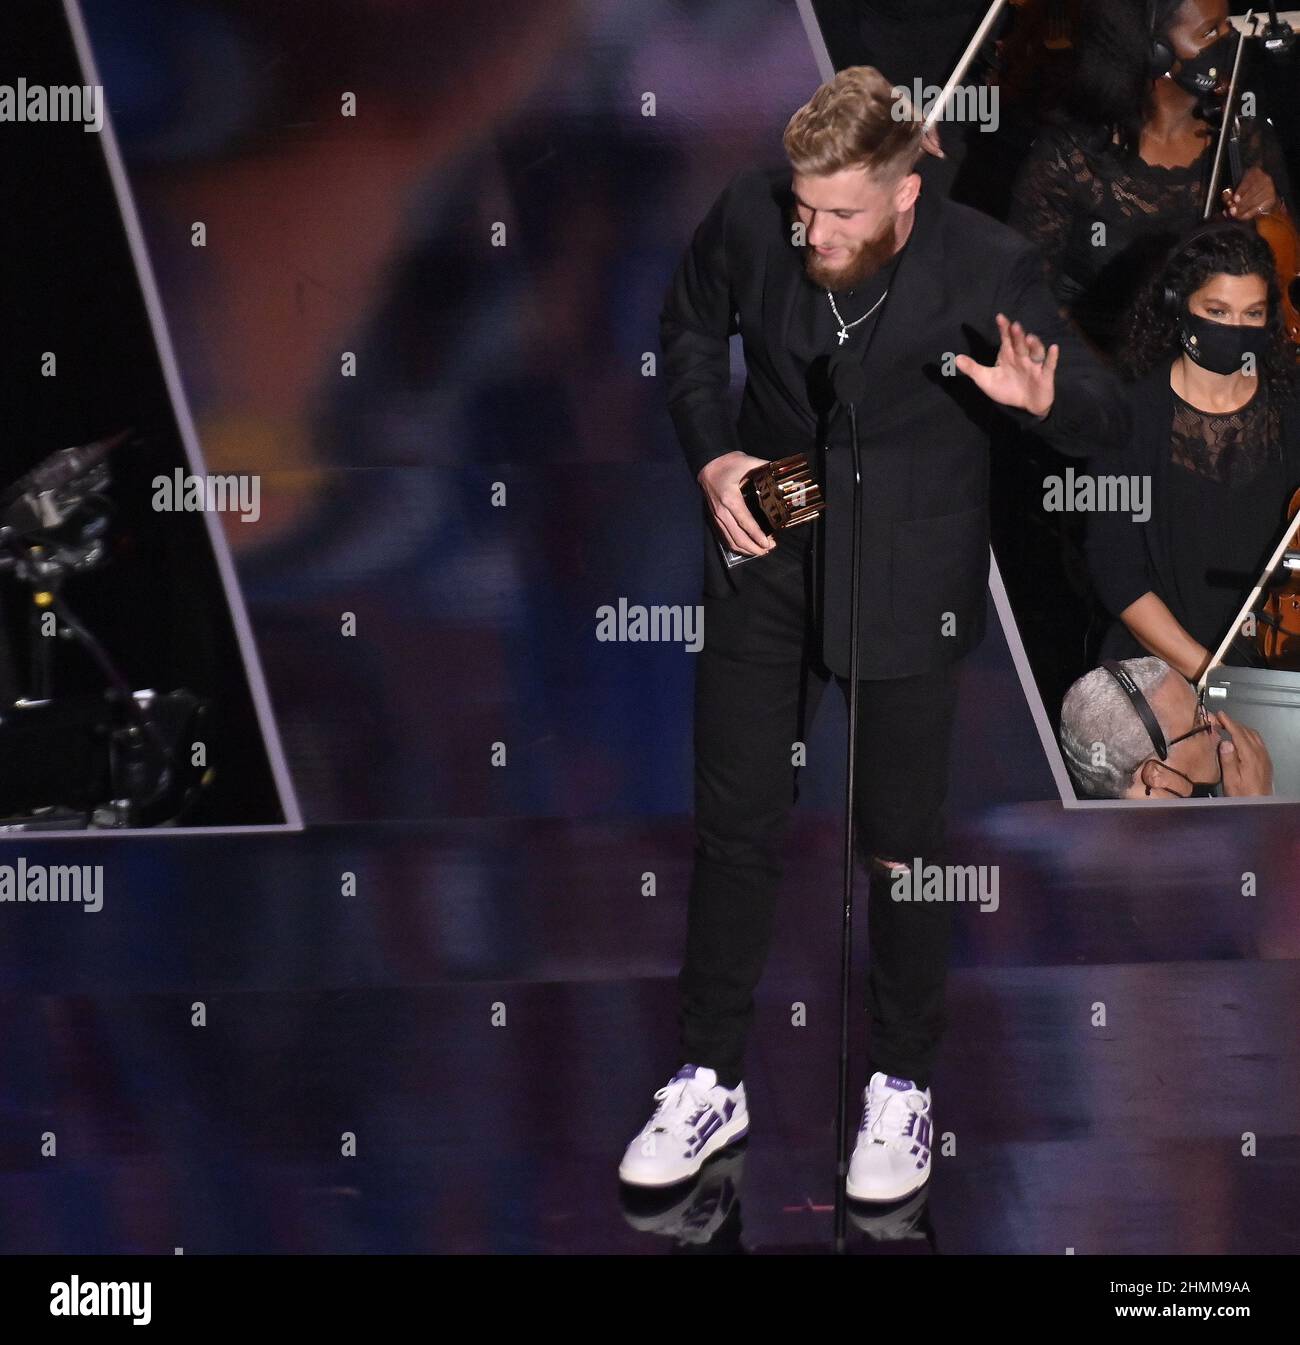 Inglewood, United States. 11th Feb, 2022. Rams' wide receiver Copper Kupp accepts the AP Offensive Player of the Year award during the NFL Honors, ABC live telecast held at the YouTube Theater in Inglewood California on Thursday, February 10, 2022. Photo by Jim Ruymen/UPI Credit: UPI/Alamy Live News Stock Photo